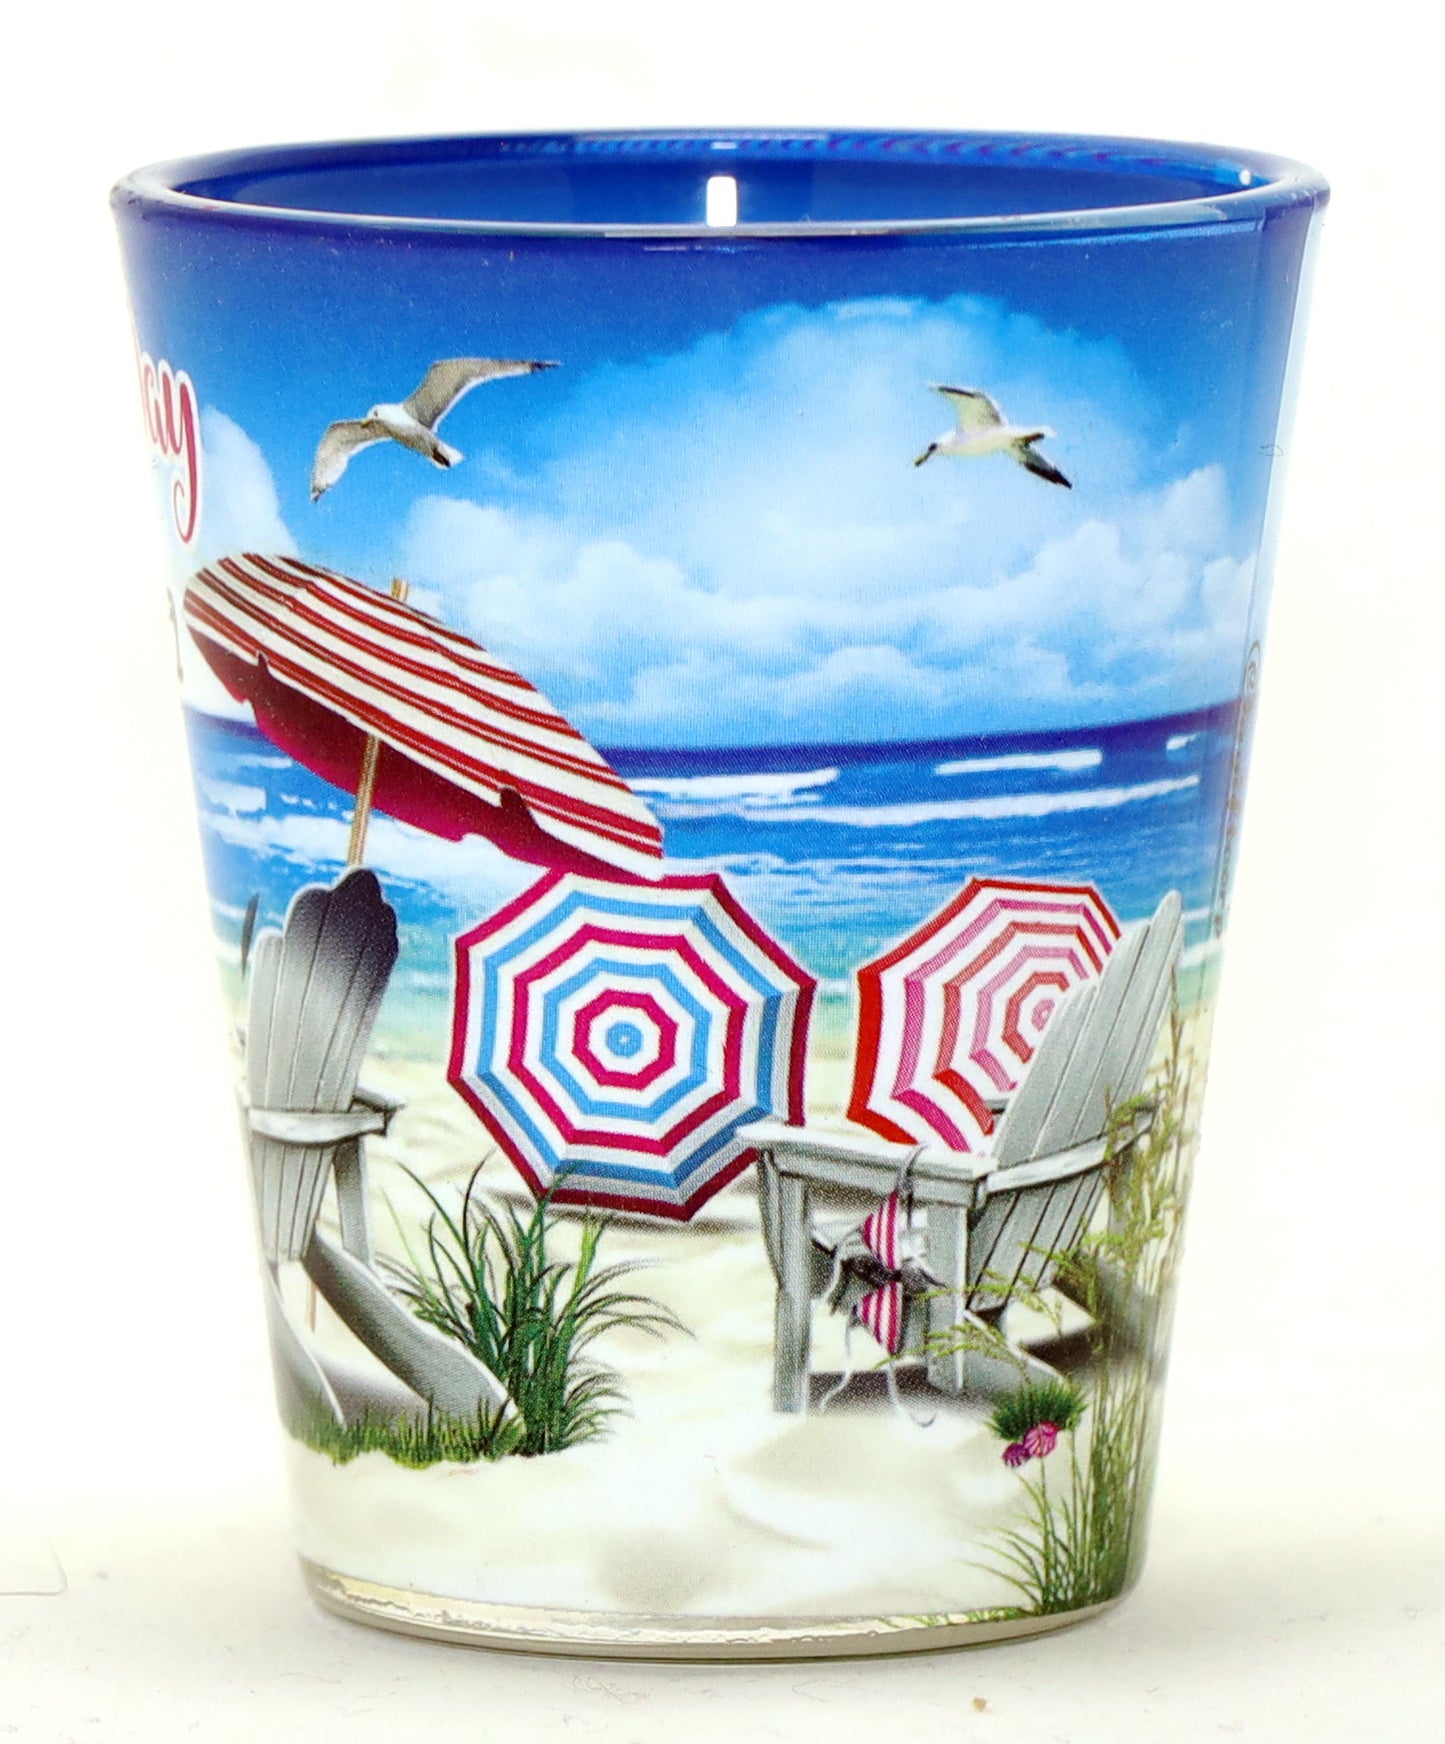 Jamaica Seas Day Umbrellas In and Out Shot Glass